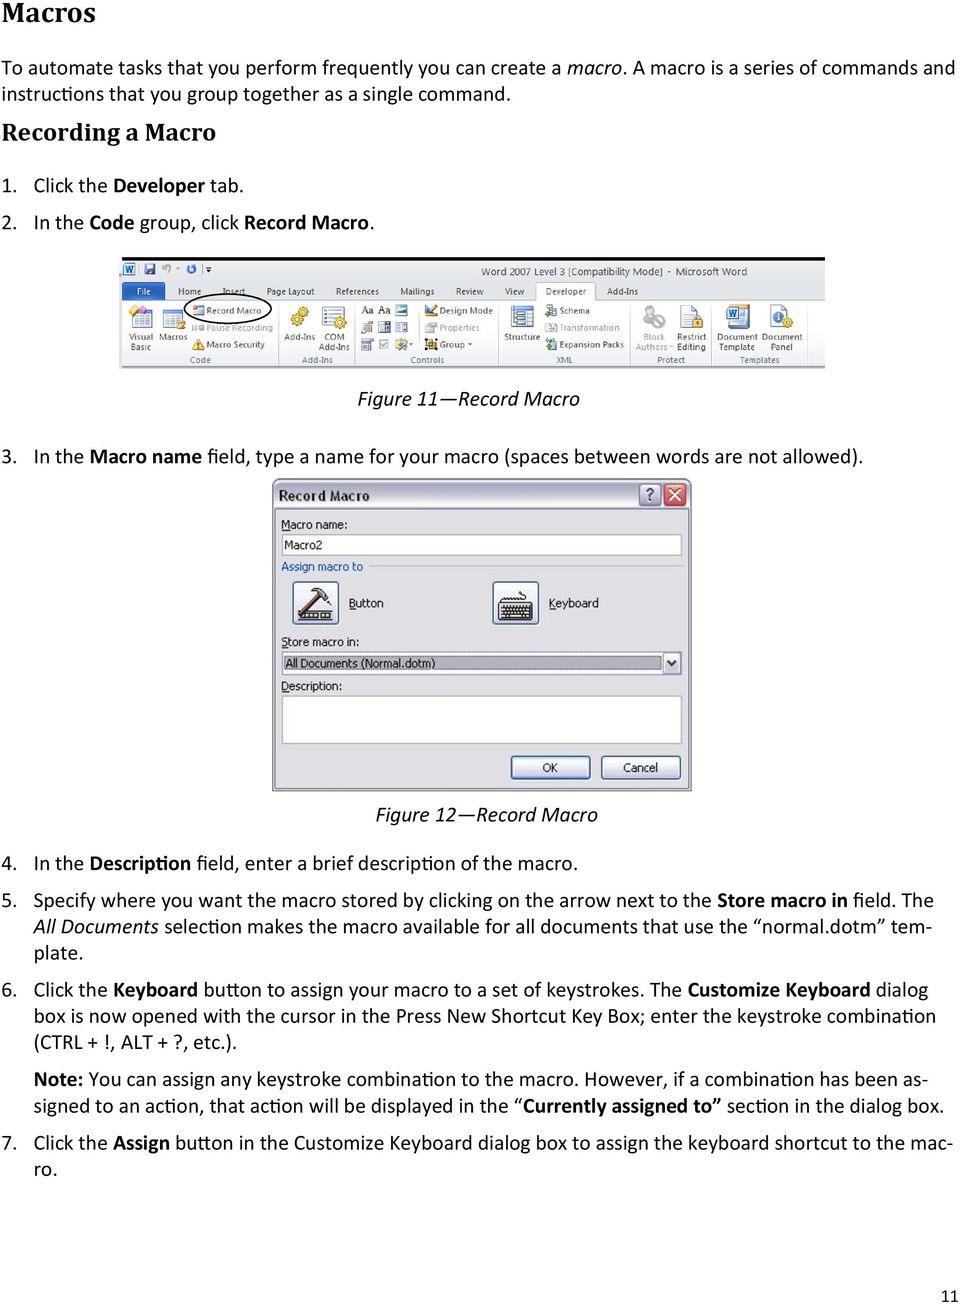 Figure 12 Record Macro 4. In the Description field, enter a brief description of the macro. 5. Specify where you want the macro stored by clicking on the arrow next to the Store macro in field.